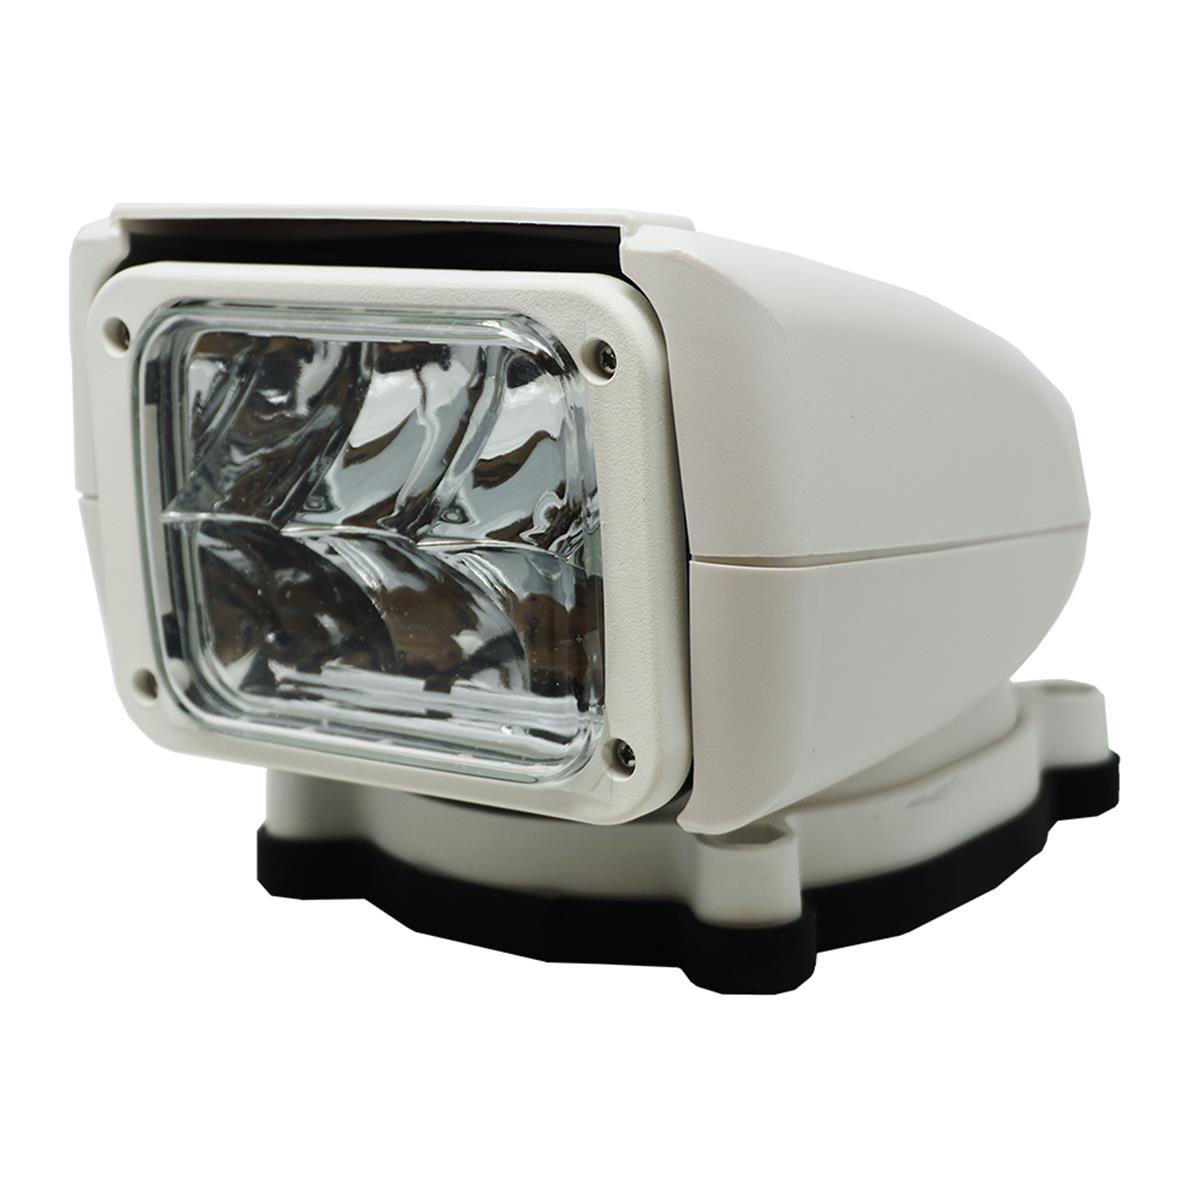 1956 Rcl-85 White Led Searchlight With Wireless Remote Control - 12-24v